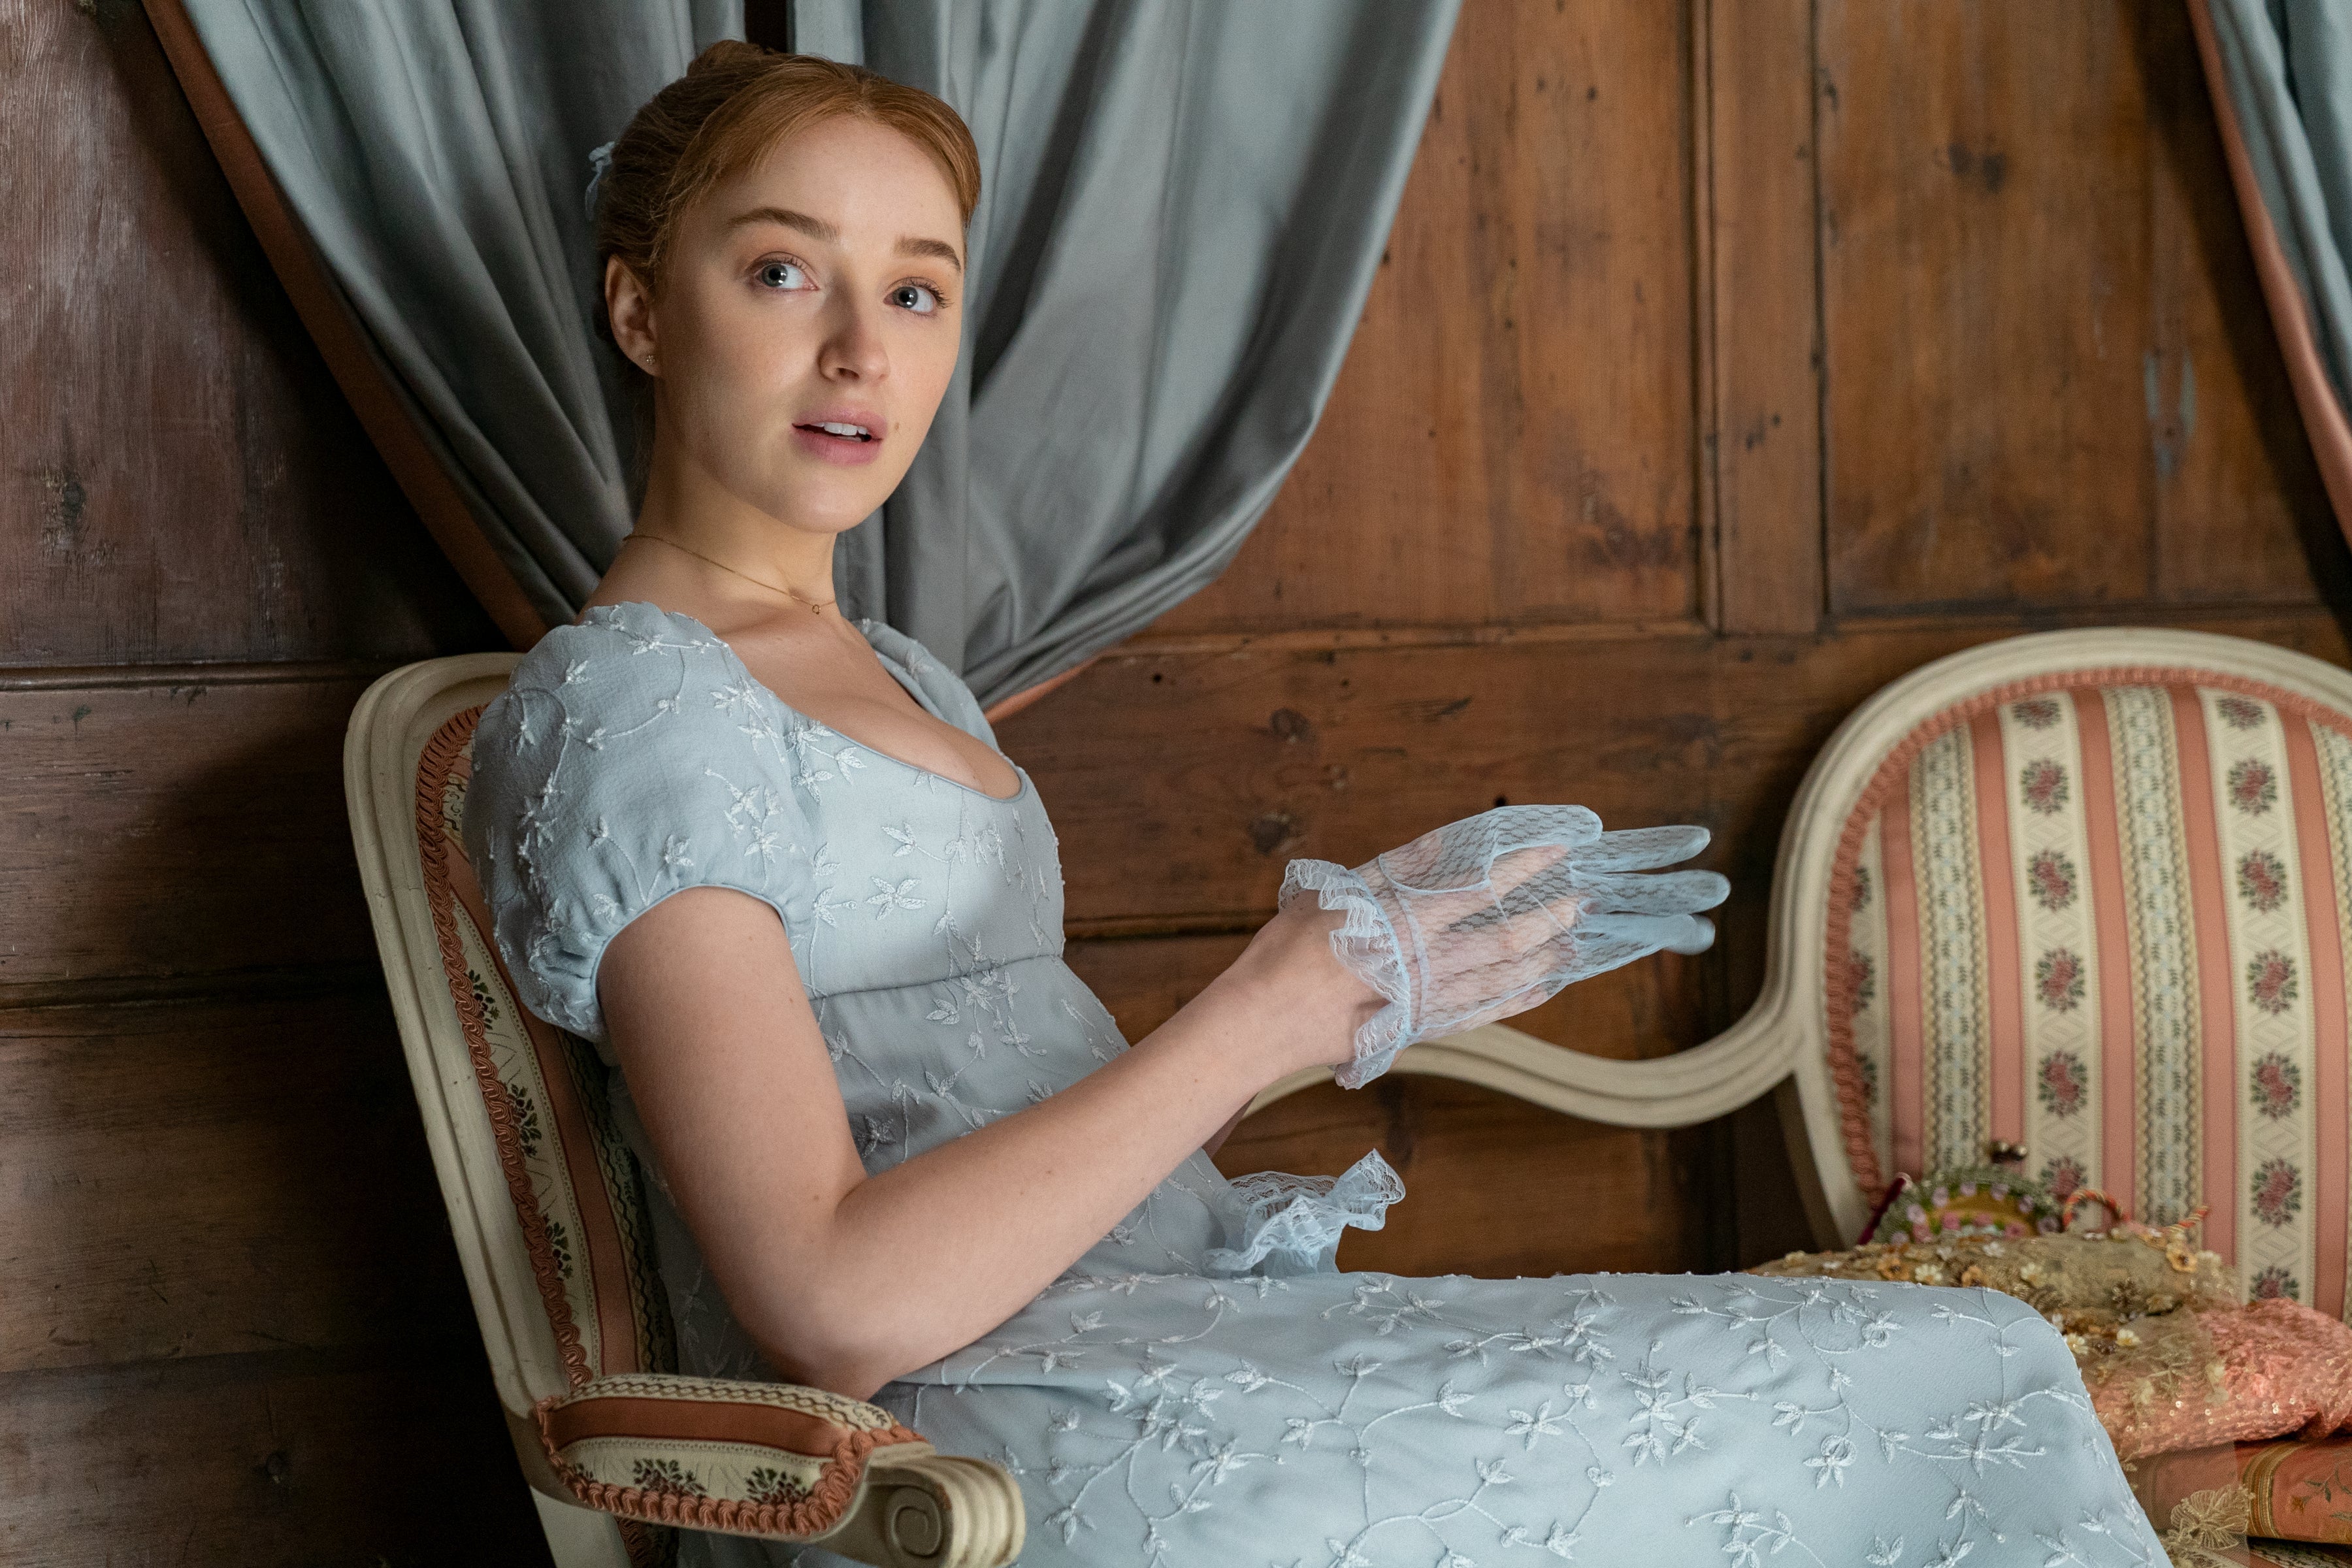 Phoebe Dynevor sits in a chair glancing over her shoulder. One hand is halfway in a translucent blue glove.